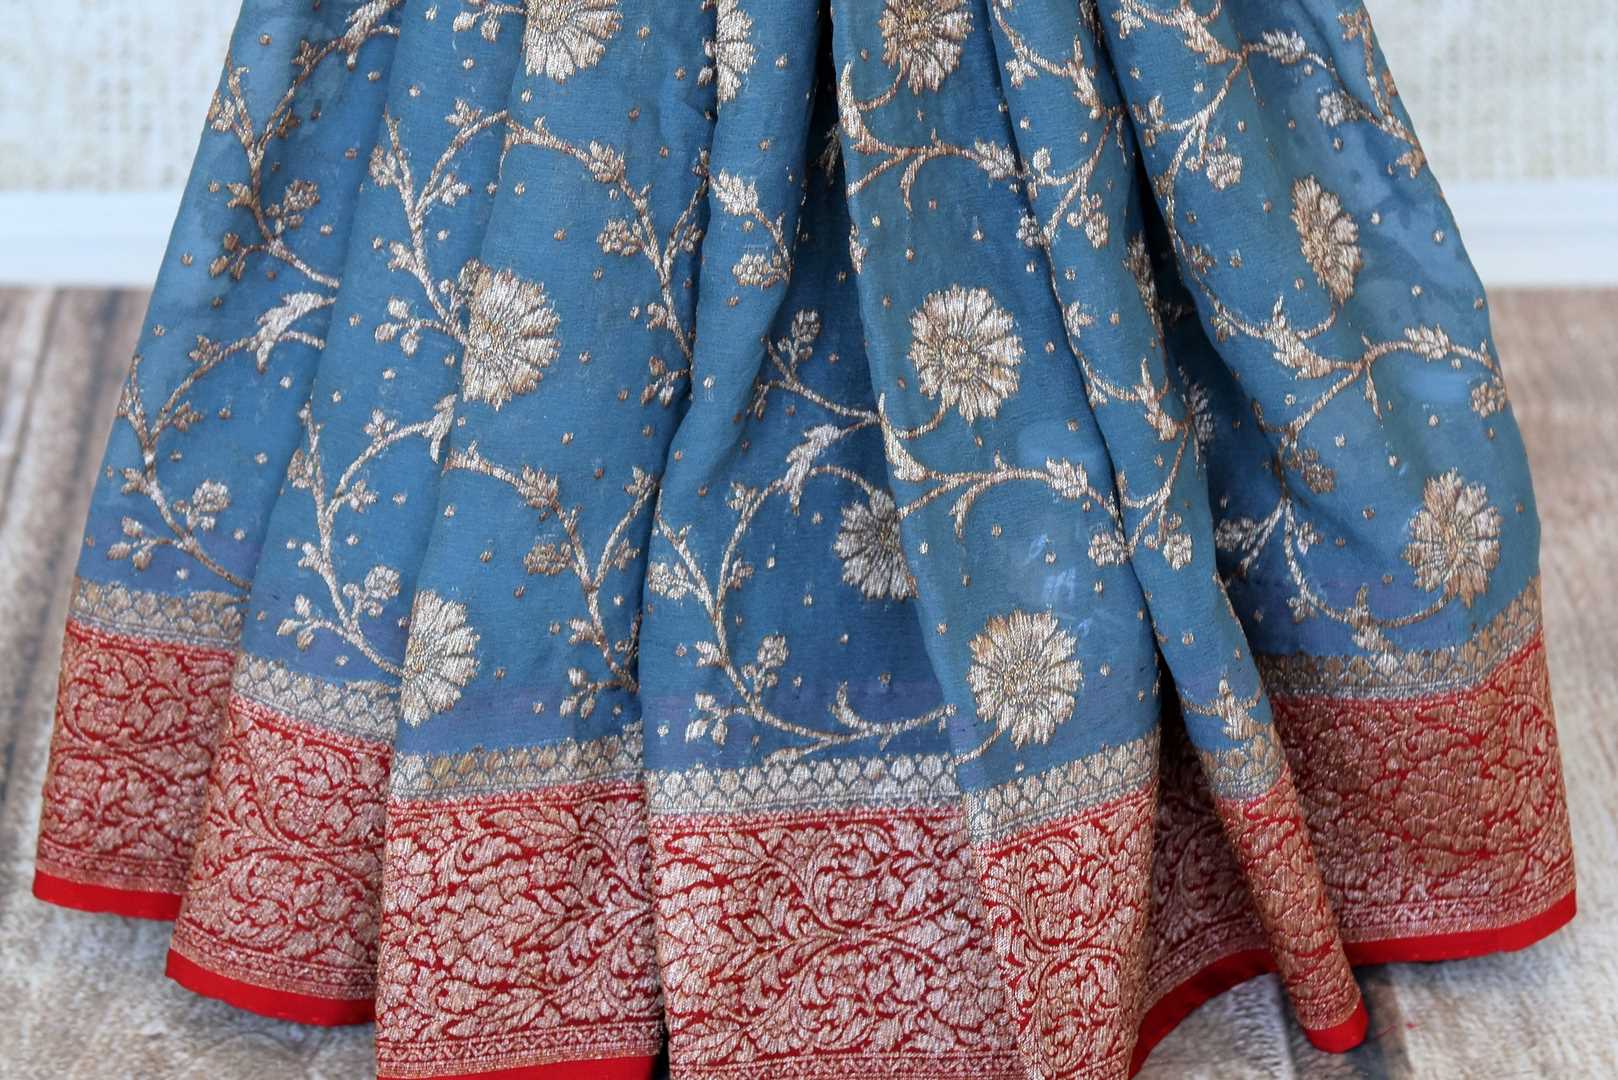 Buy blue georgette Banarasi sari online in USA with red zari border. Feel traditional on special occasions in beautiful Indian designer saris from Pure Elegance Indian fashion store in USA. Choose from a splendid variety of Banarasi sarees, pure handwoven saris. Buy online.-pleats